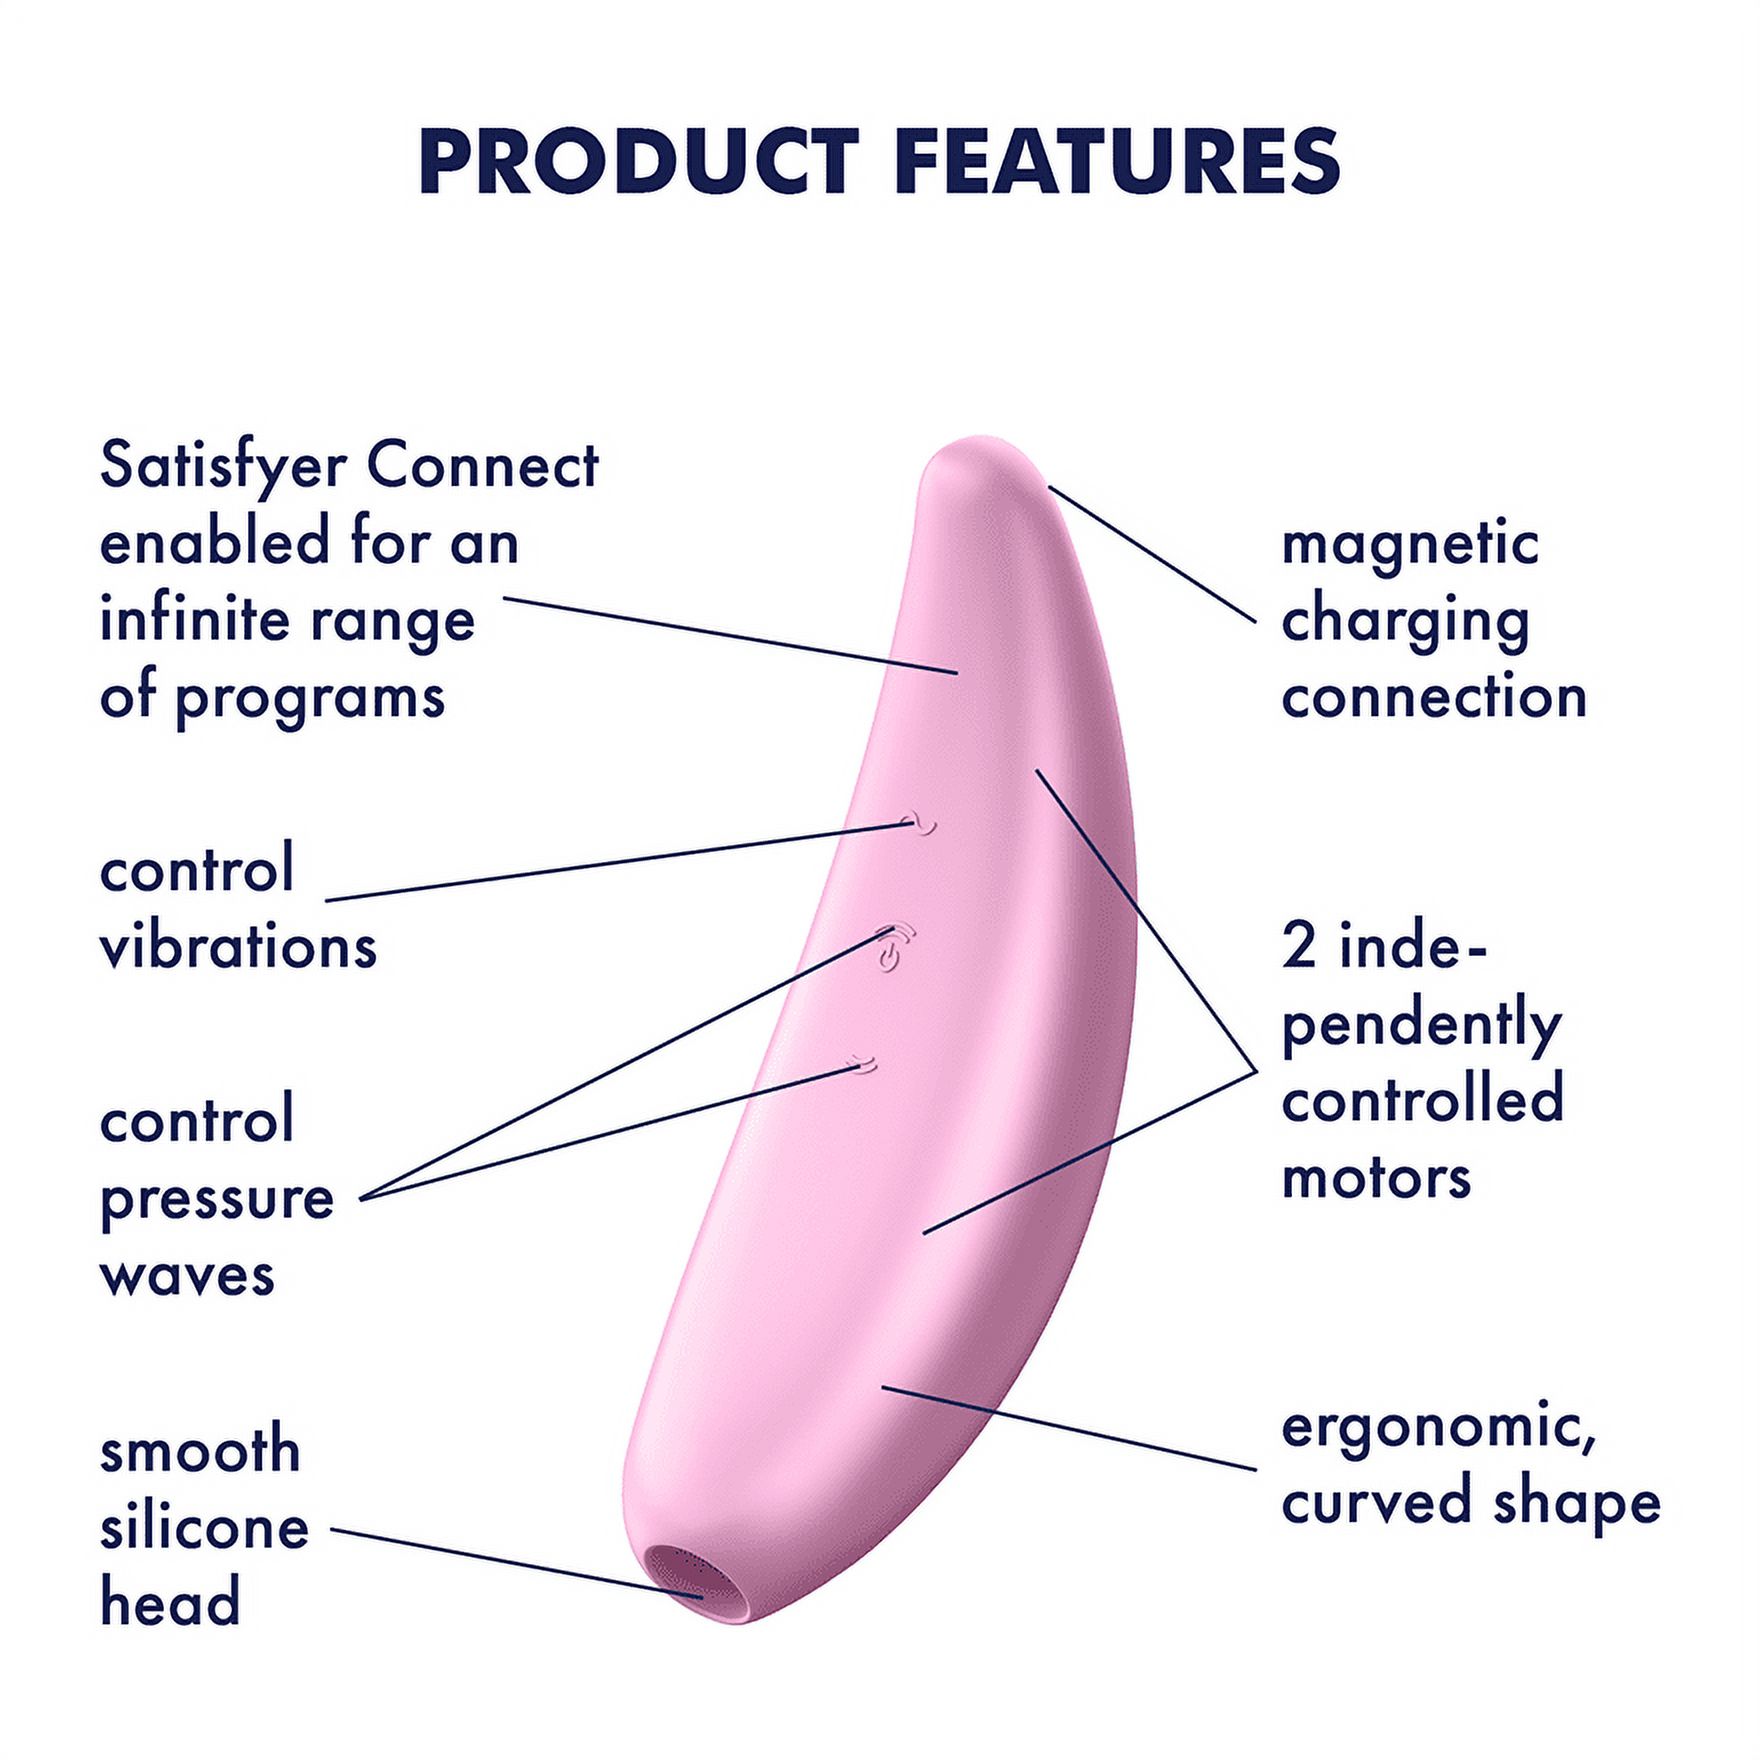 Satisfyer Curvy 3+ Air-Pulse Clitoris Stimulating Vibrator with App Control - Clitoral Sucking Pressure-Wave Technology & Vibration, Compatible with Satisfyer App, Waterproof, Rechargeable (Pink) - image 4 of 7